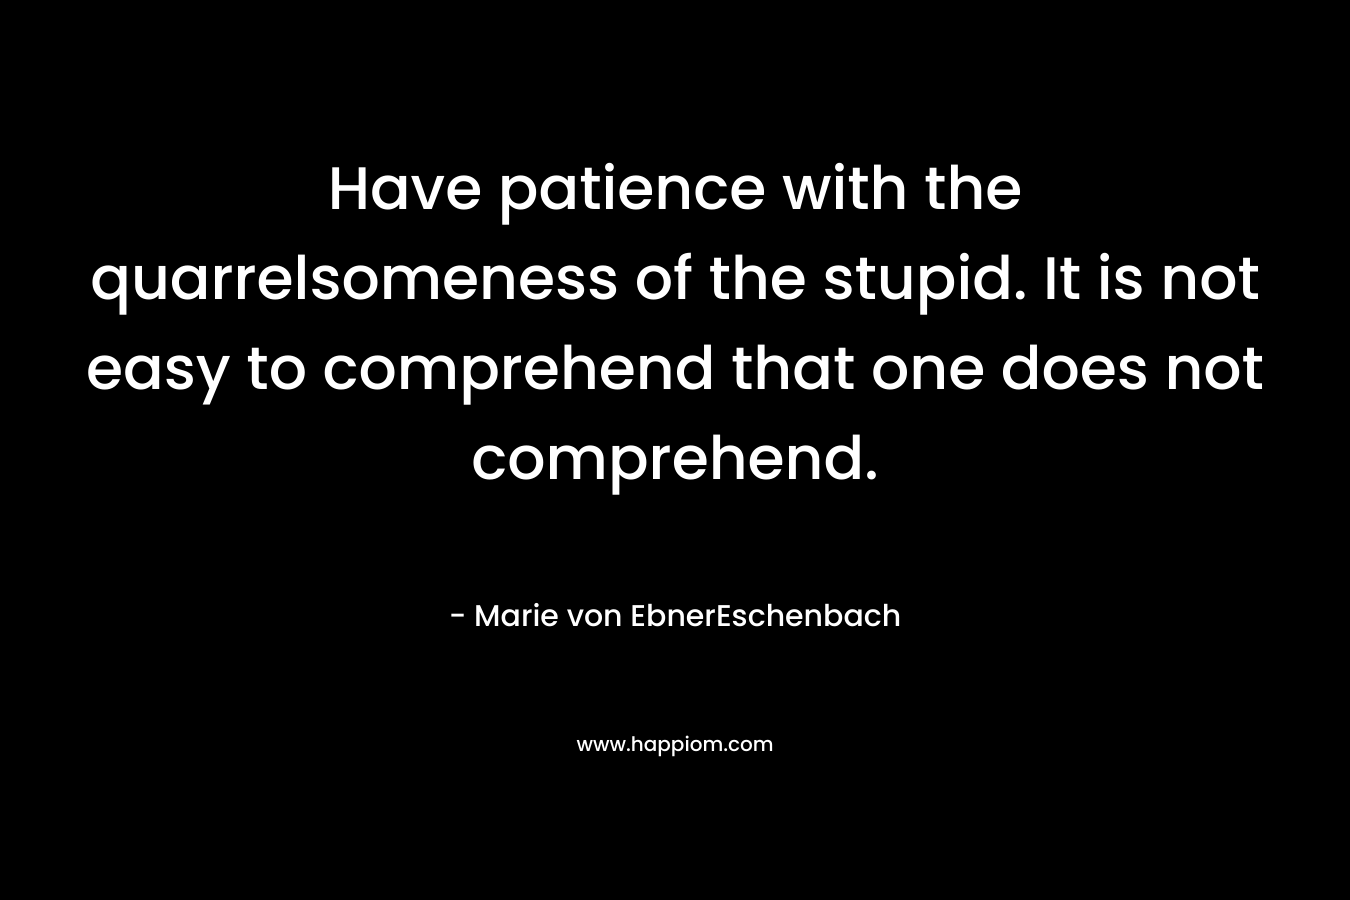 Have patience with the quarrelsomeness of the stupid. It is not easy to comprehend that one does not comprehend.